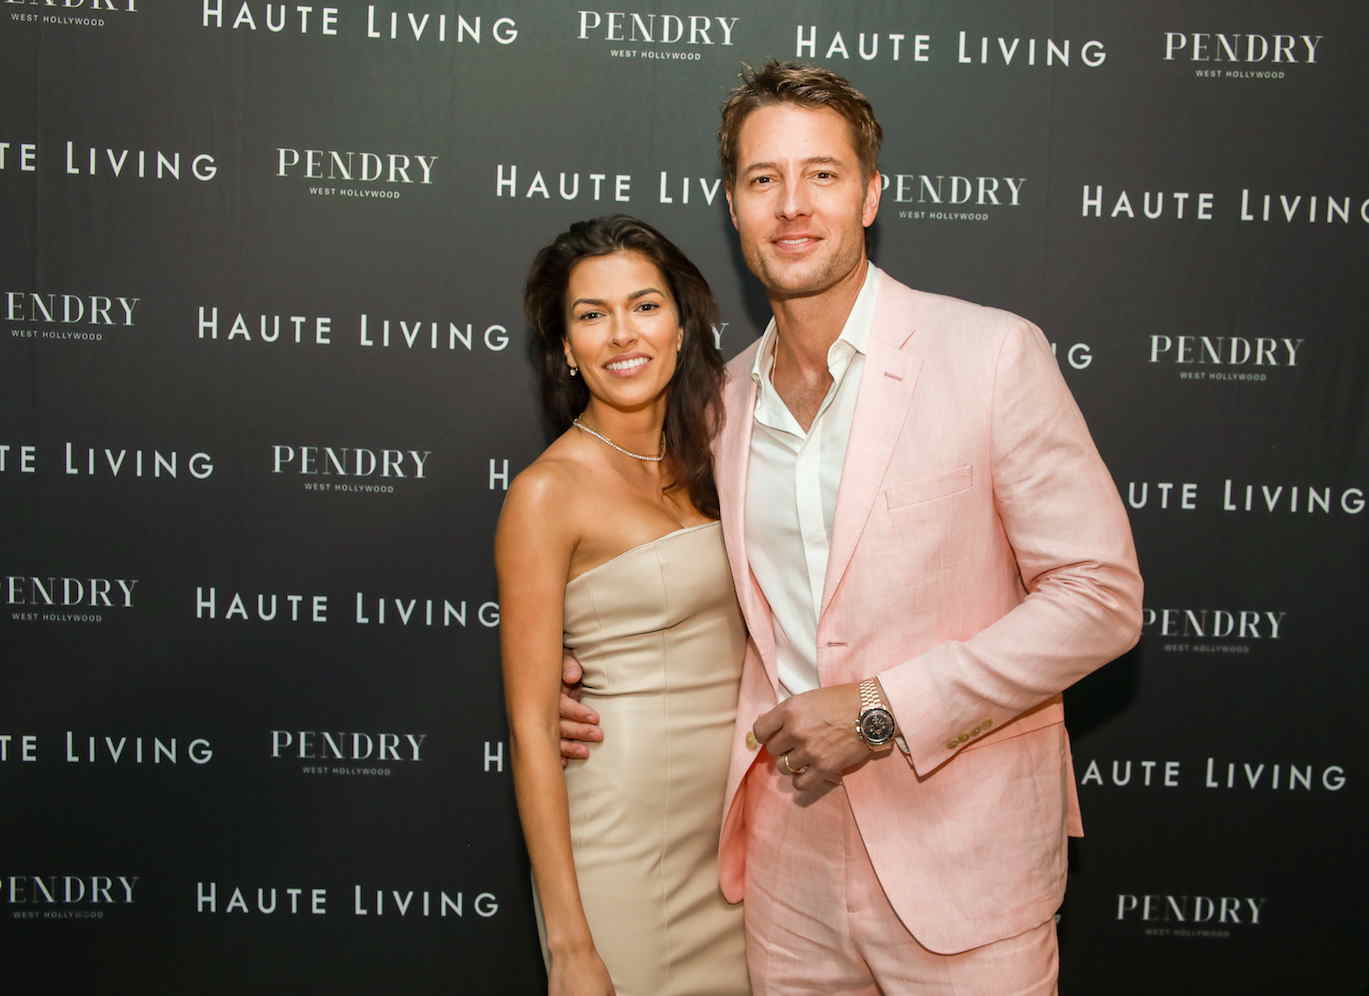 Justin Hartley Toasts The End Of His “This Is Us” Era With Haute Living & Omega